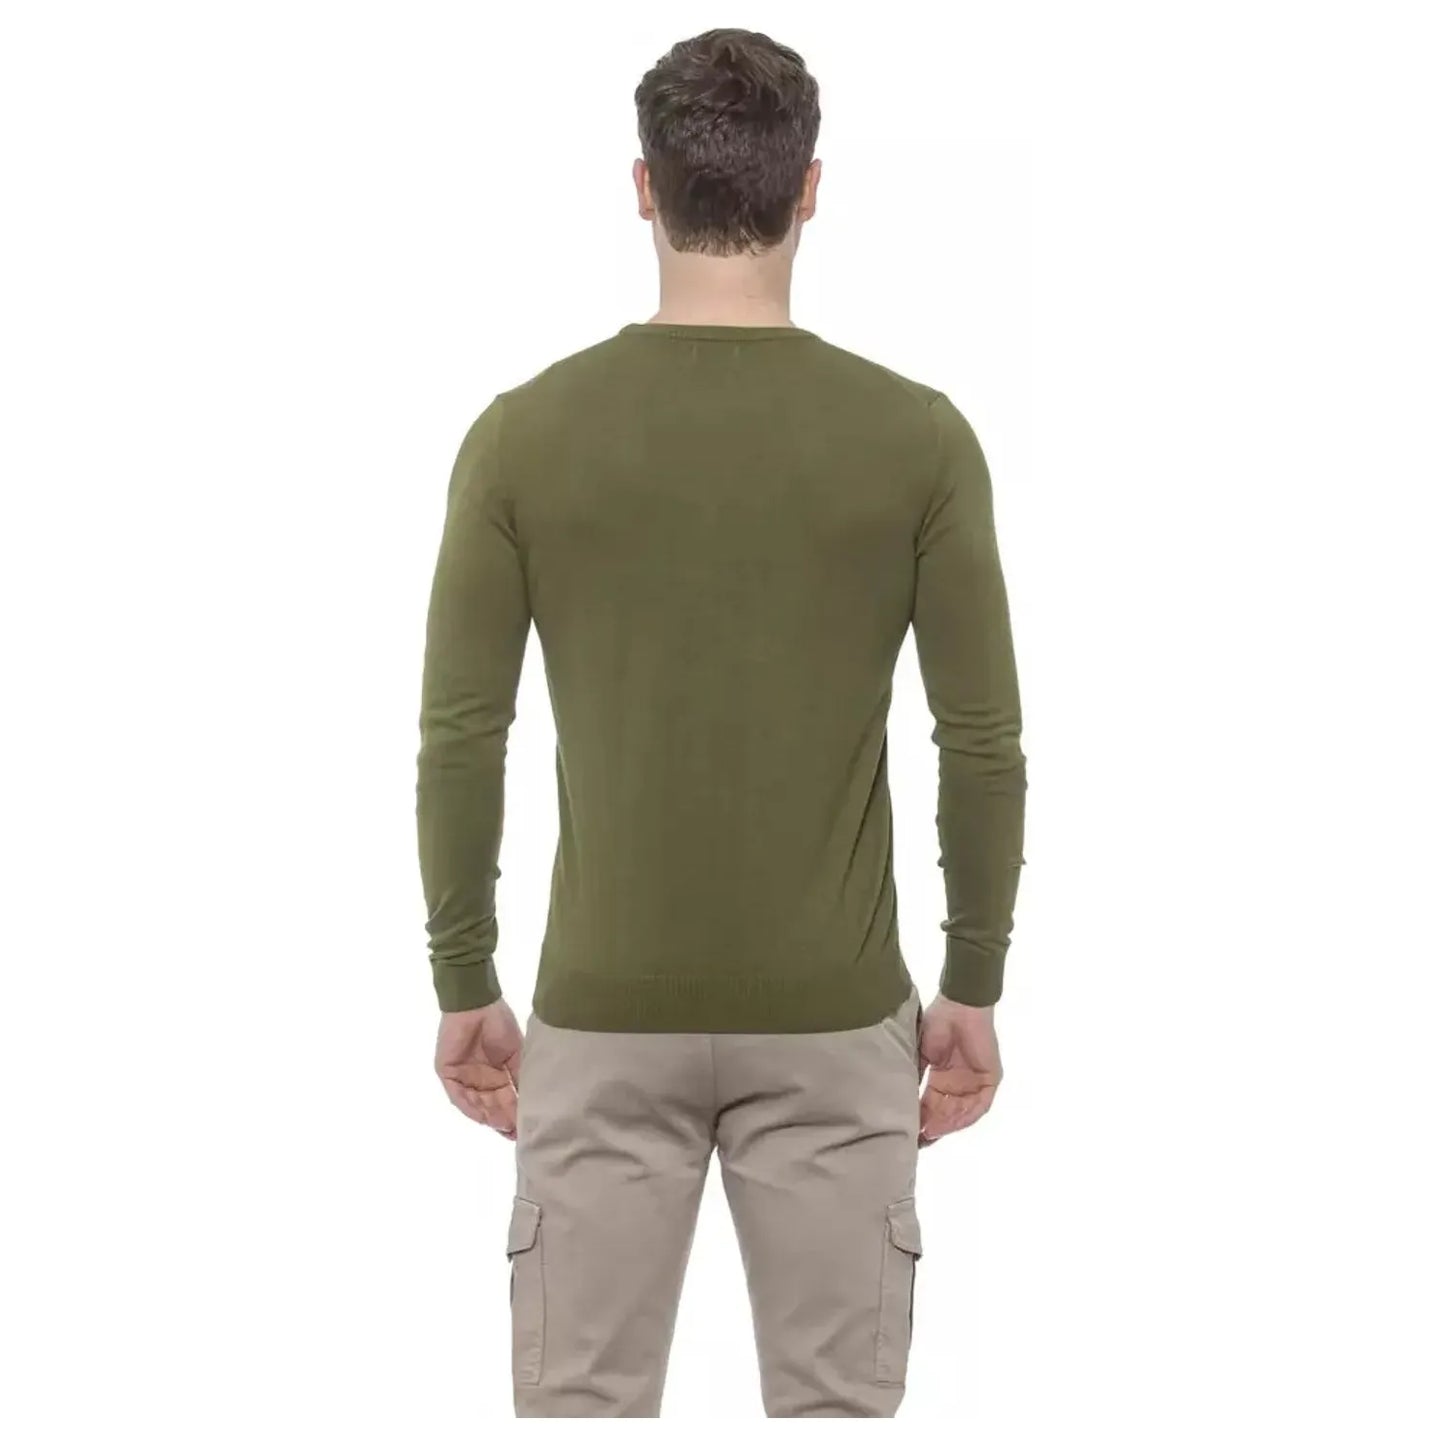 Conte of Florence Emerald Crewneck Cotton Sweater for Men olivegreen-sweater-1 stock_product_image_20333_432629786-17-cab39d97-518.webp